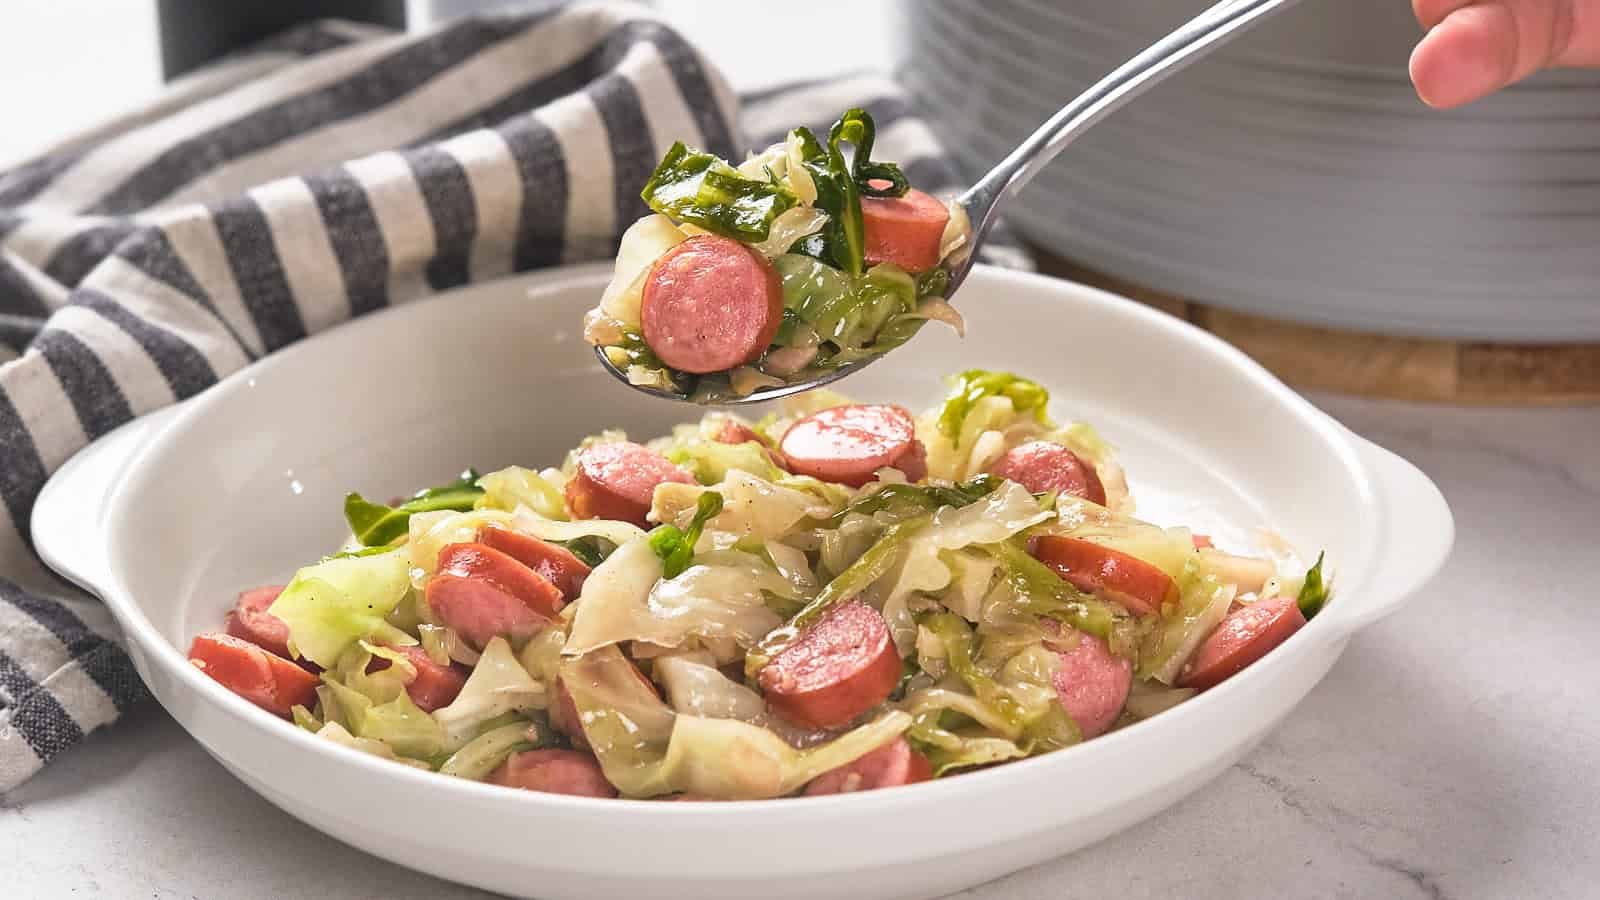 Cast iron bowl with cabbage and sausage.